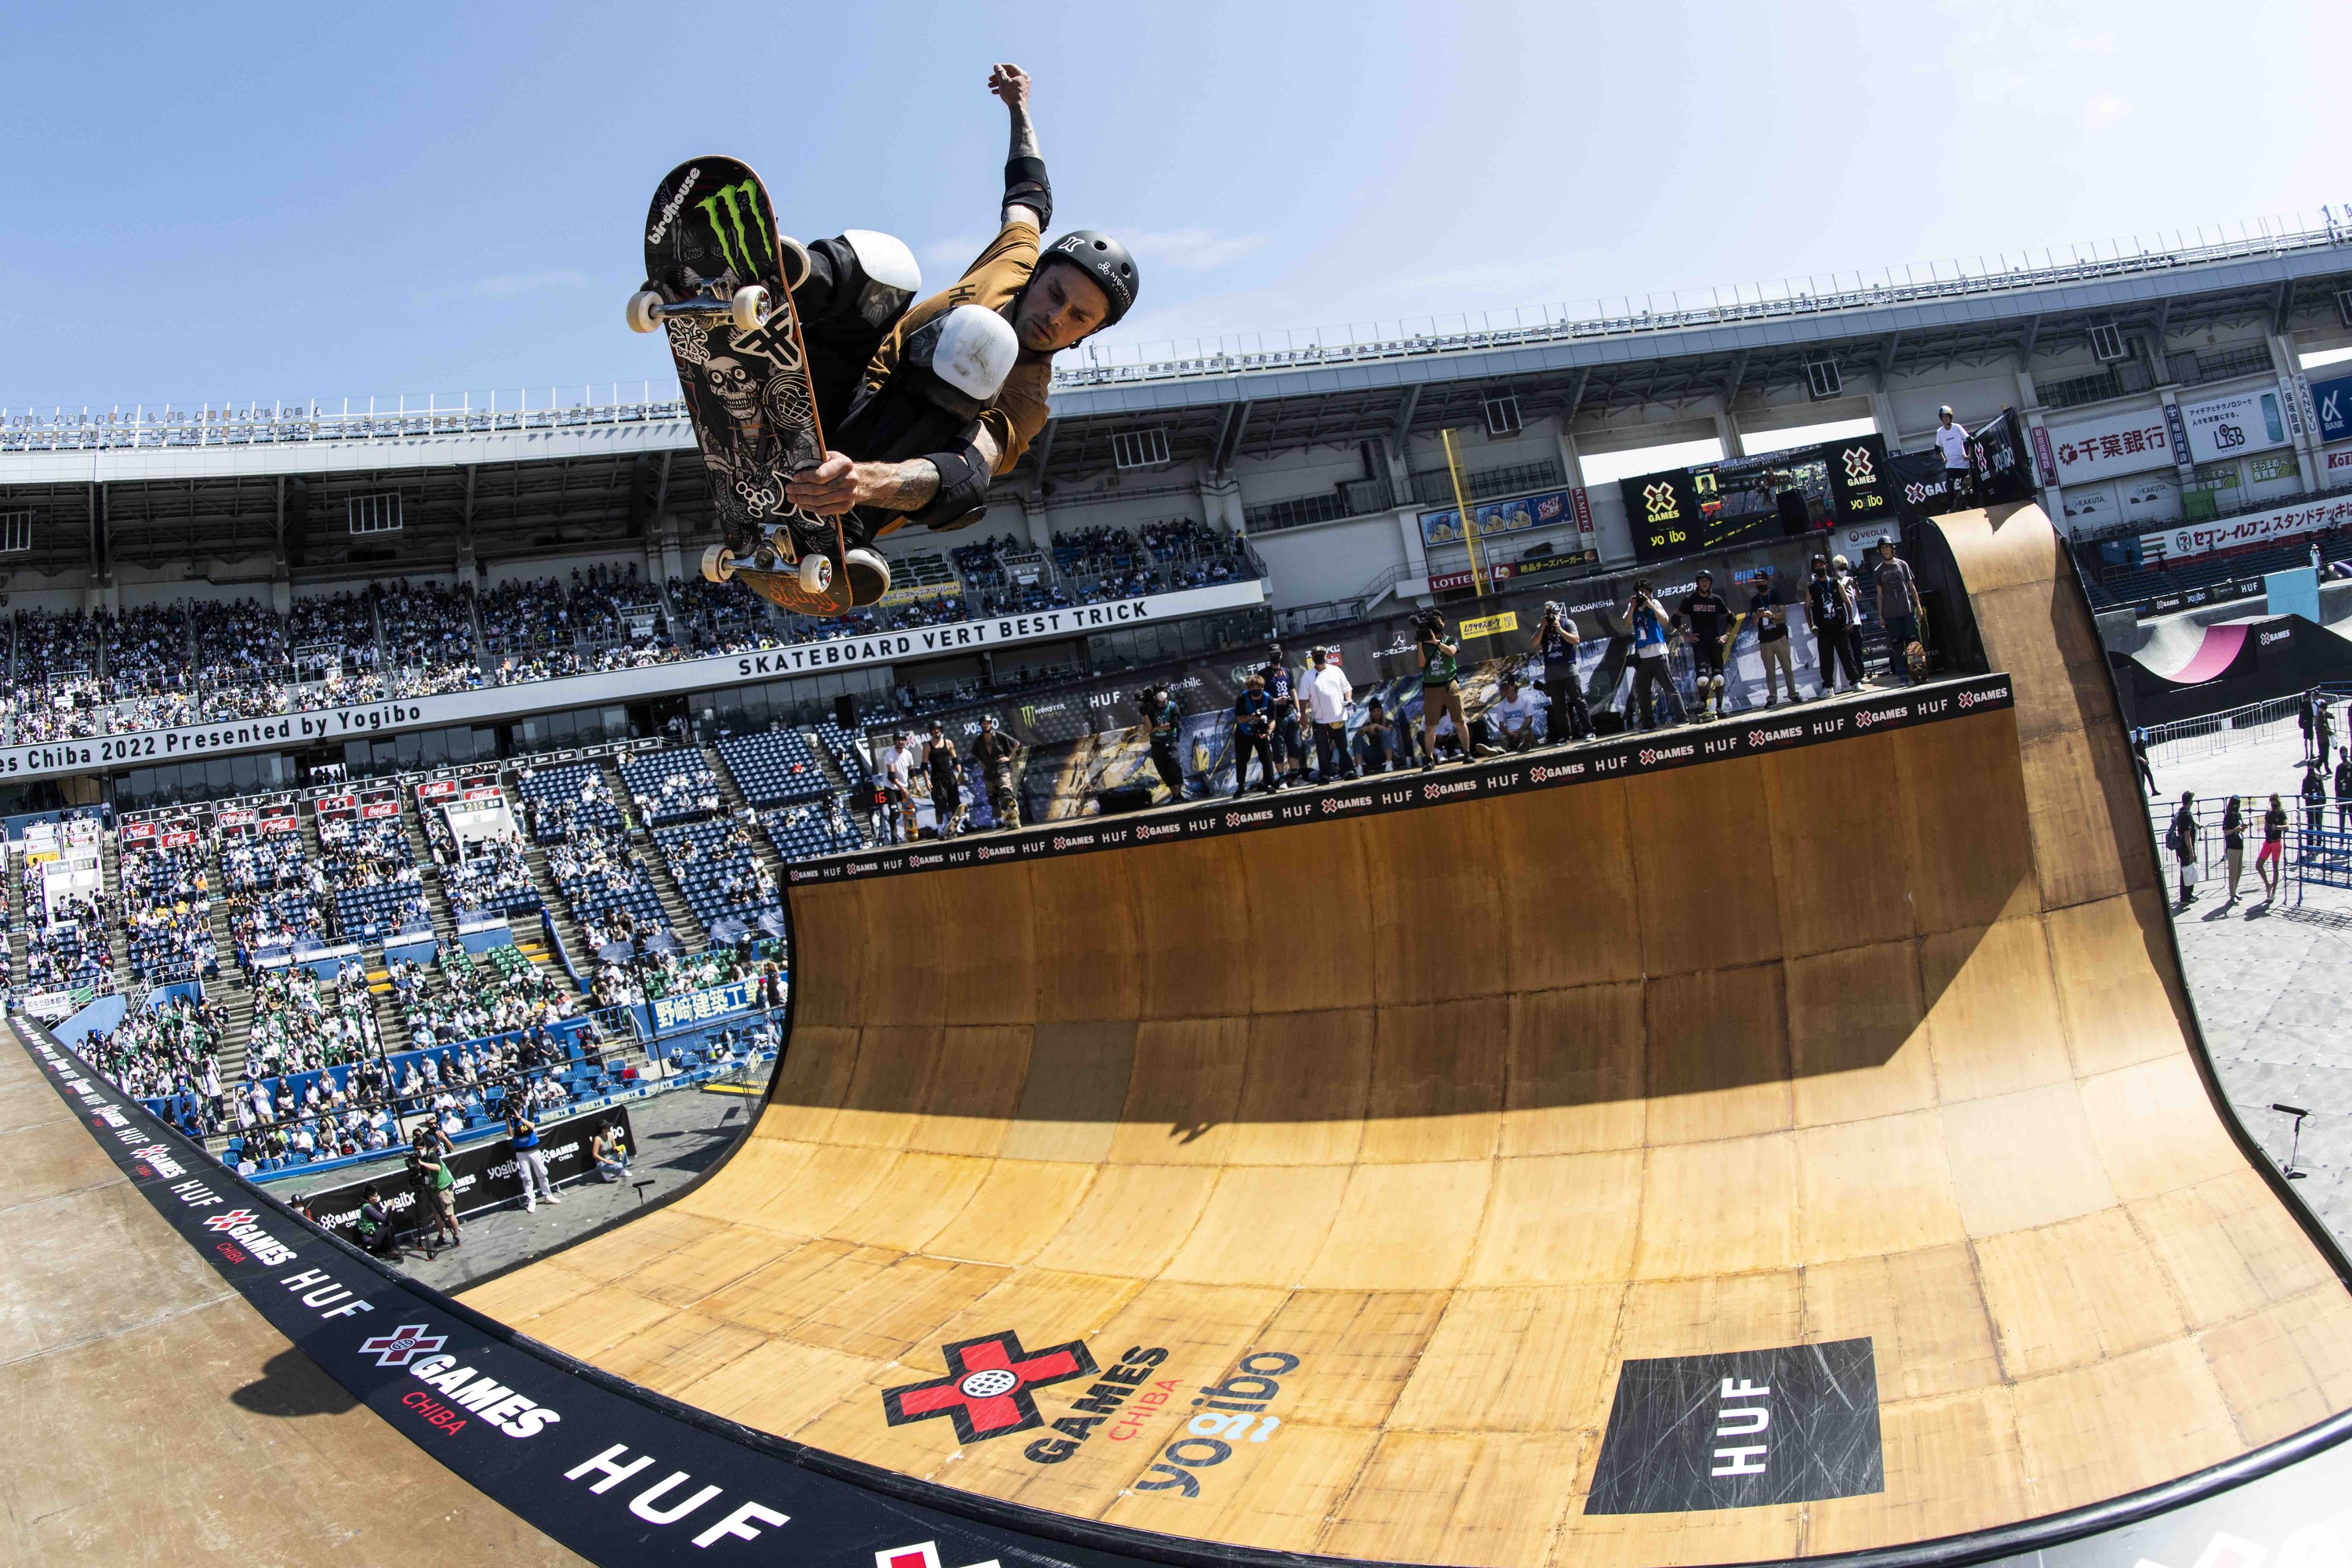 Extreme sports championship X Games return to Chiba in May 2023